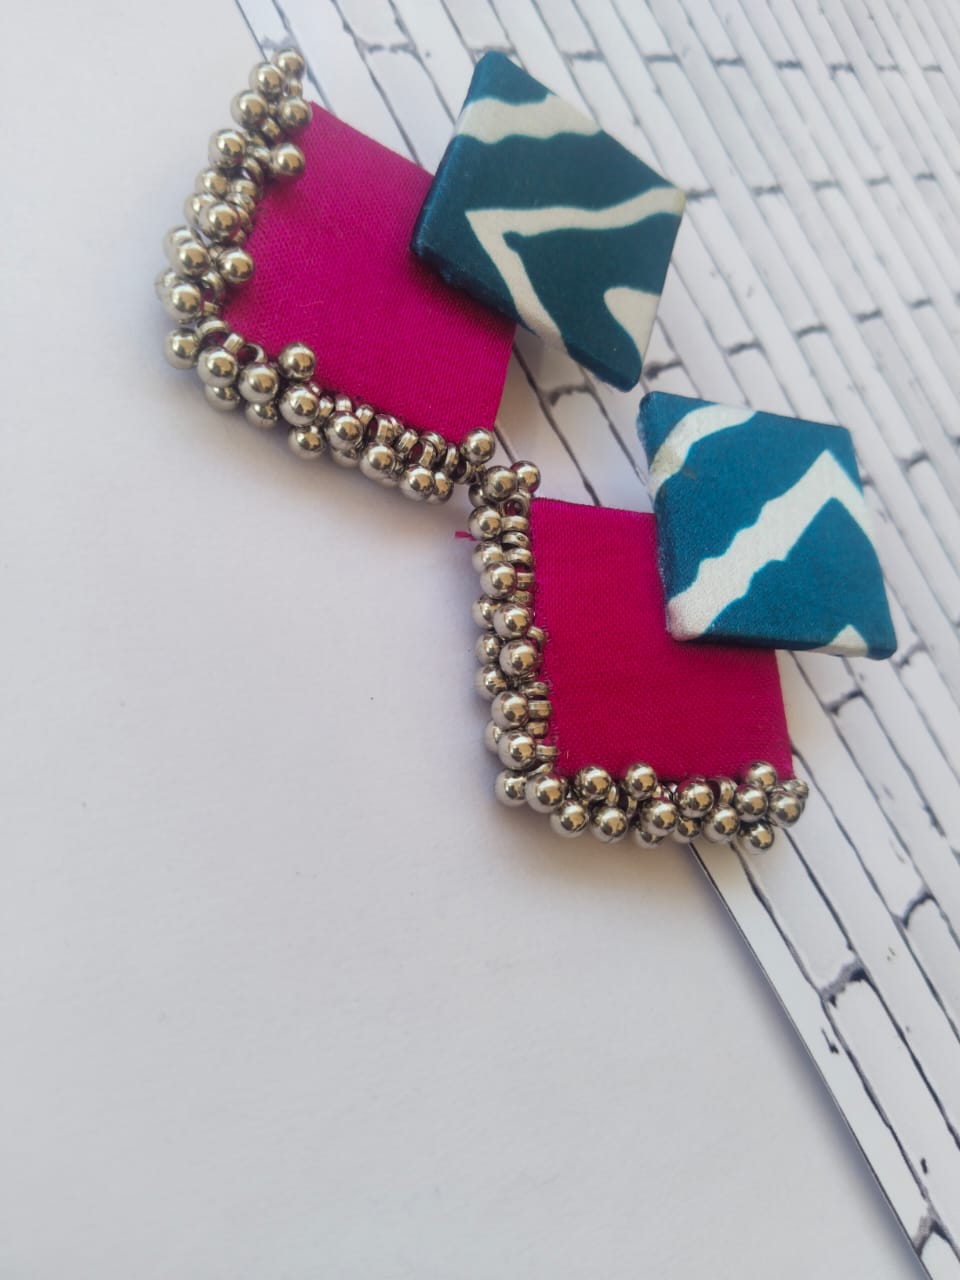 Printed blue and magenta pink earrings with silver beads on white backdrop